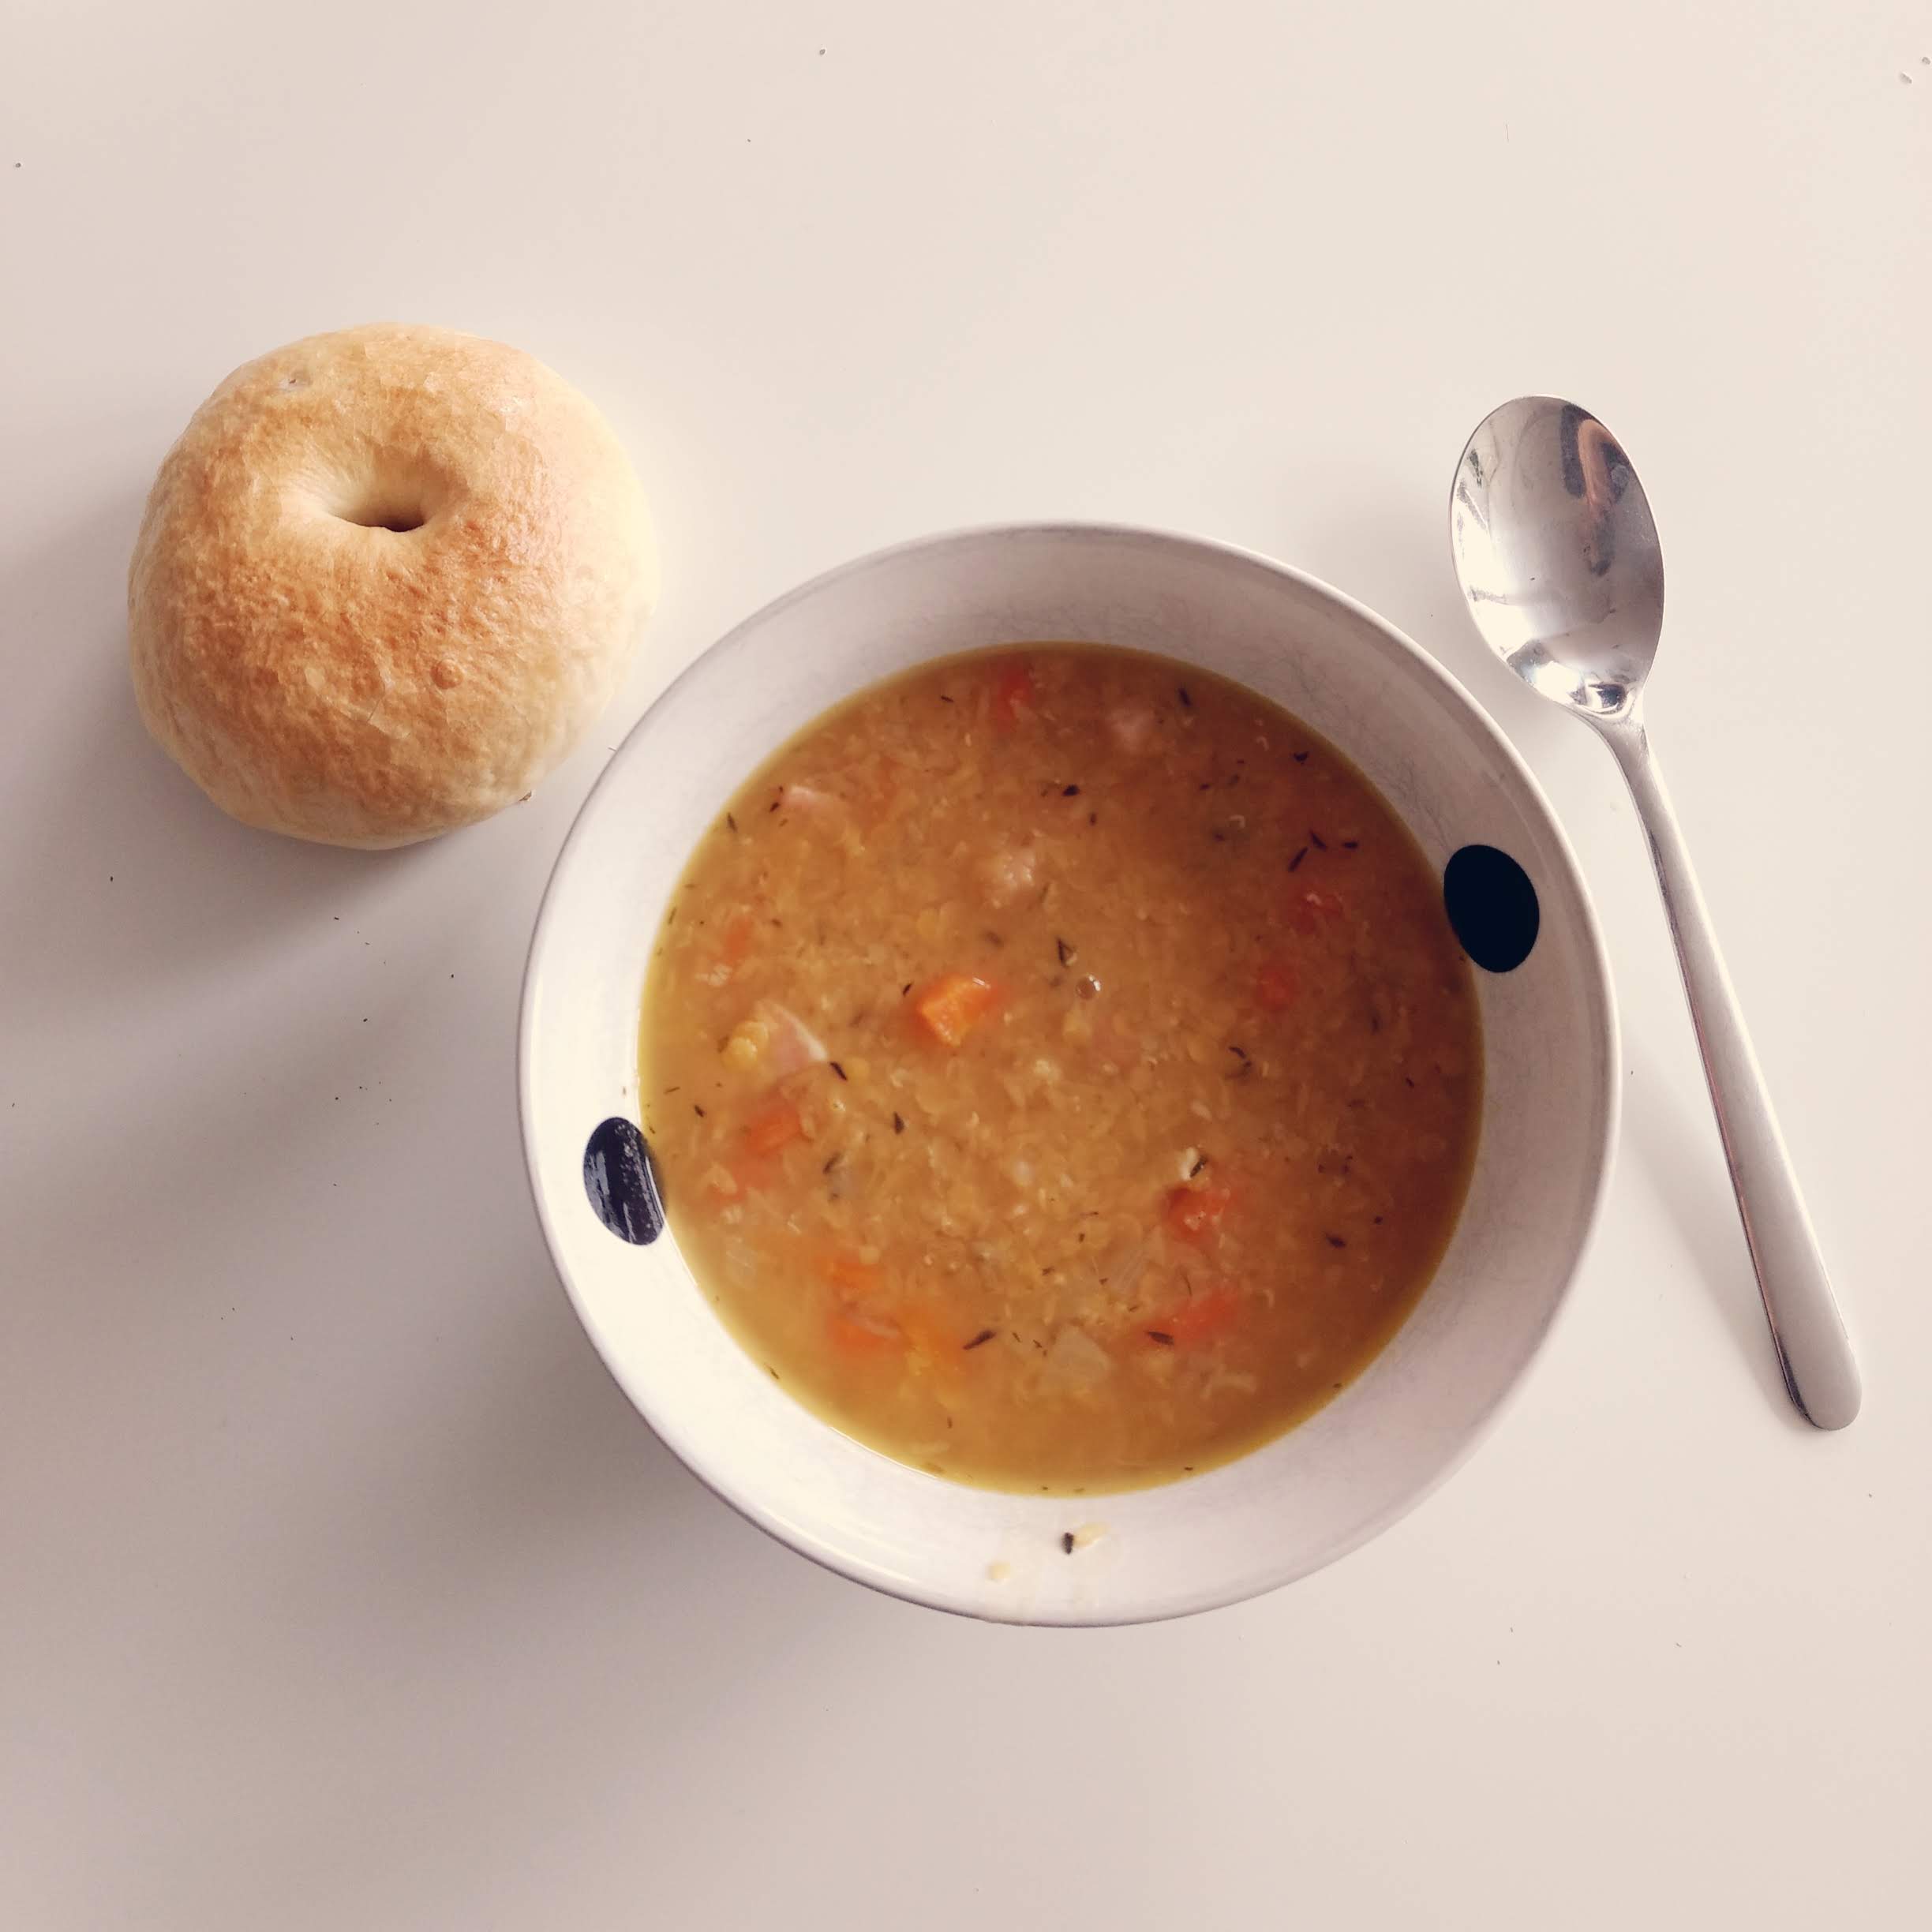 Soup and bagel - self-care ideas that don't break the bank - zoe ashwood